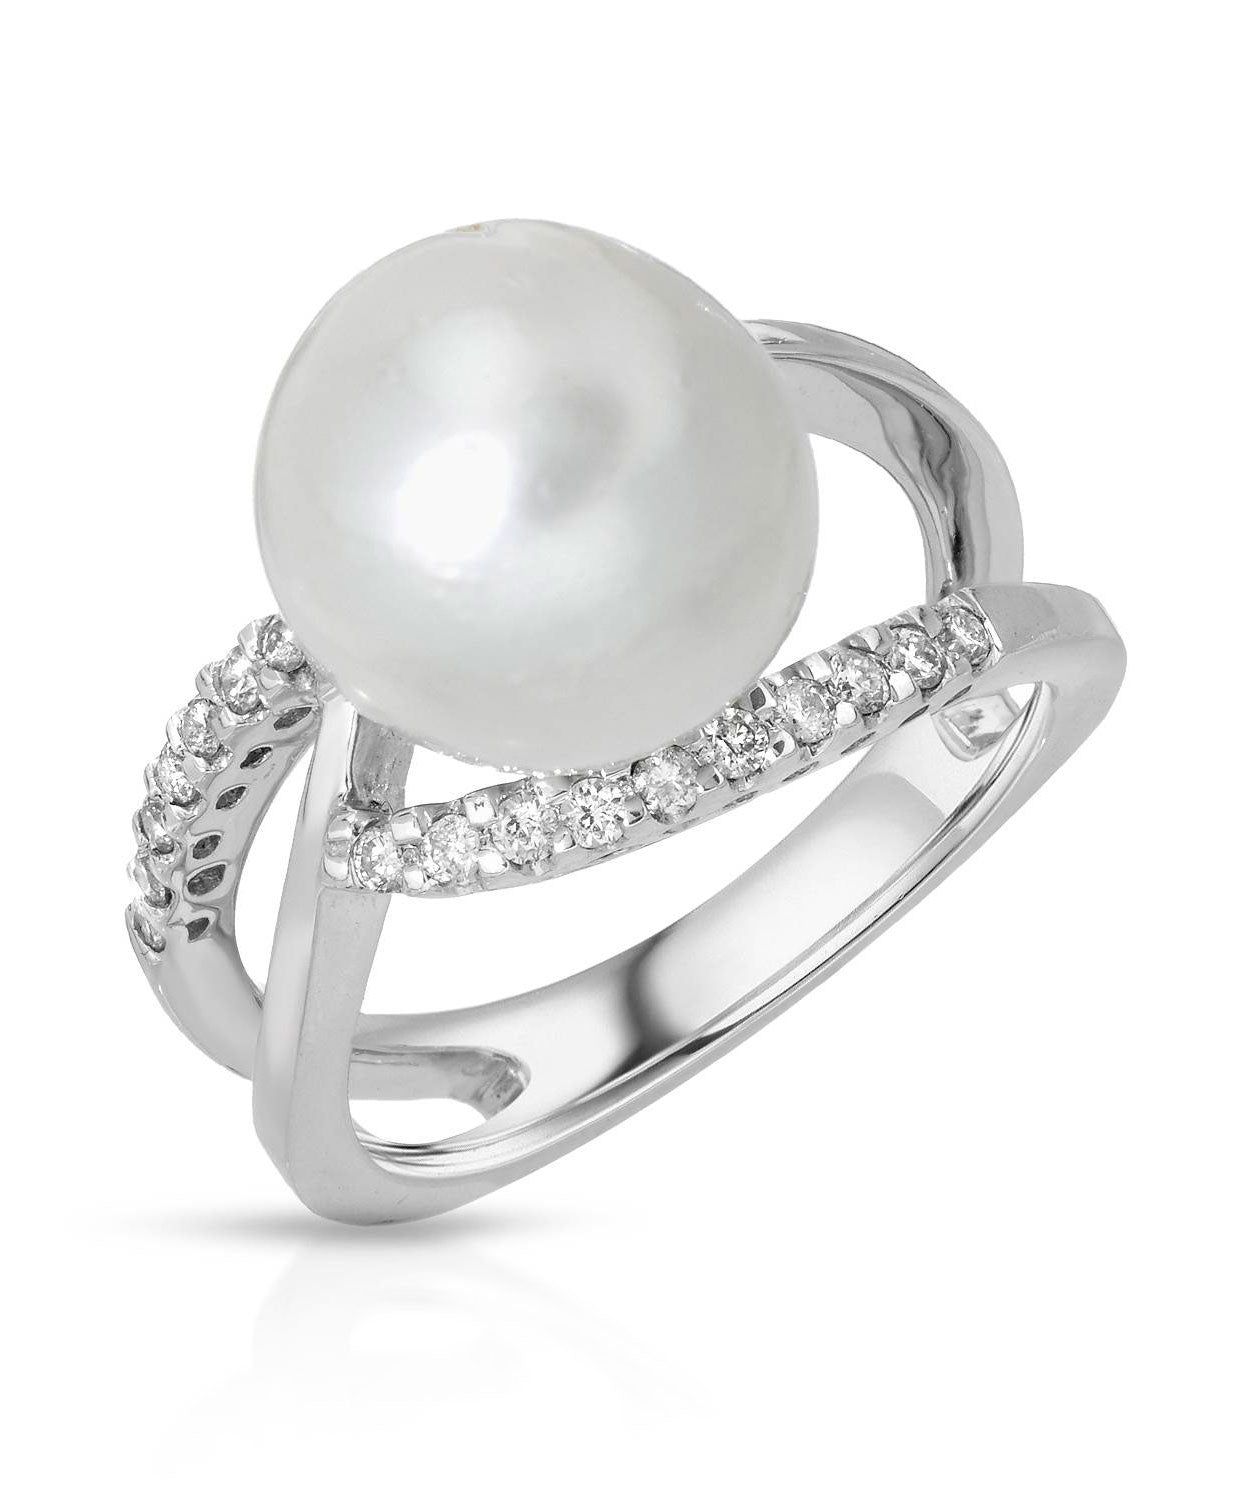 11.5 mm Natural Freshwater Pearl and Diamond 18k White Gold Ring View 1